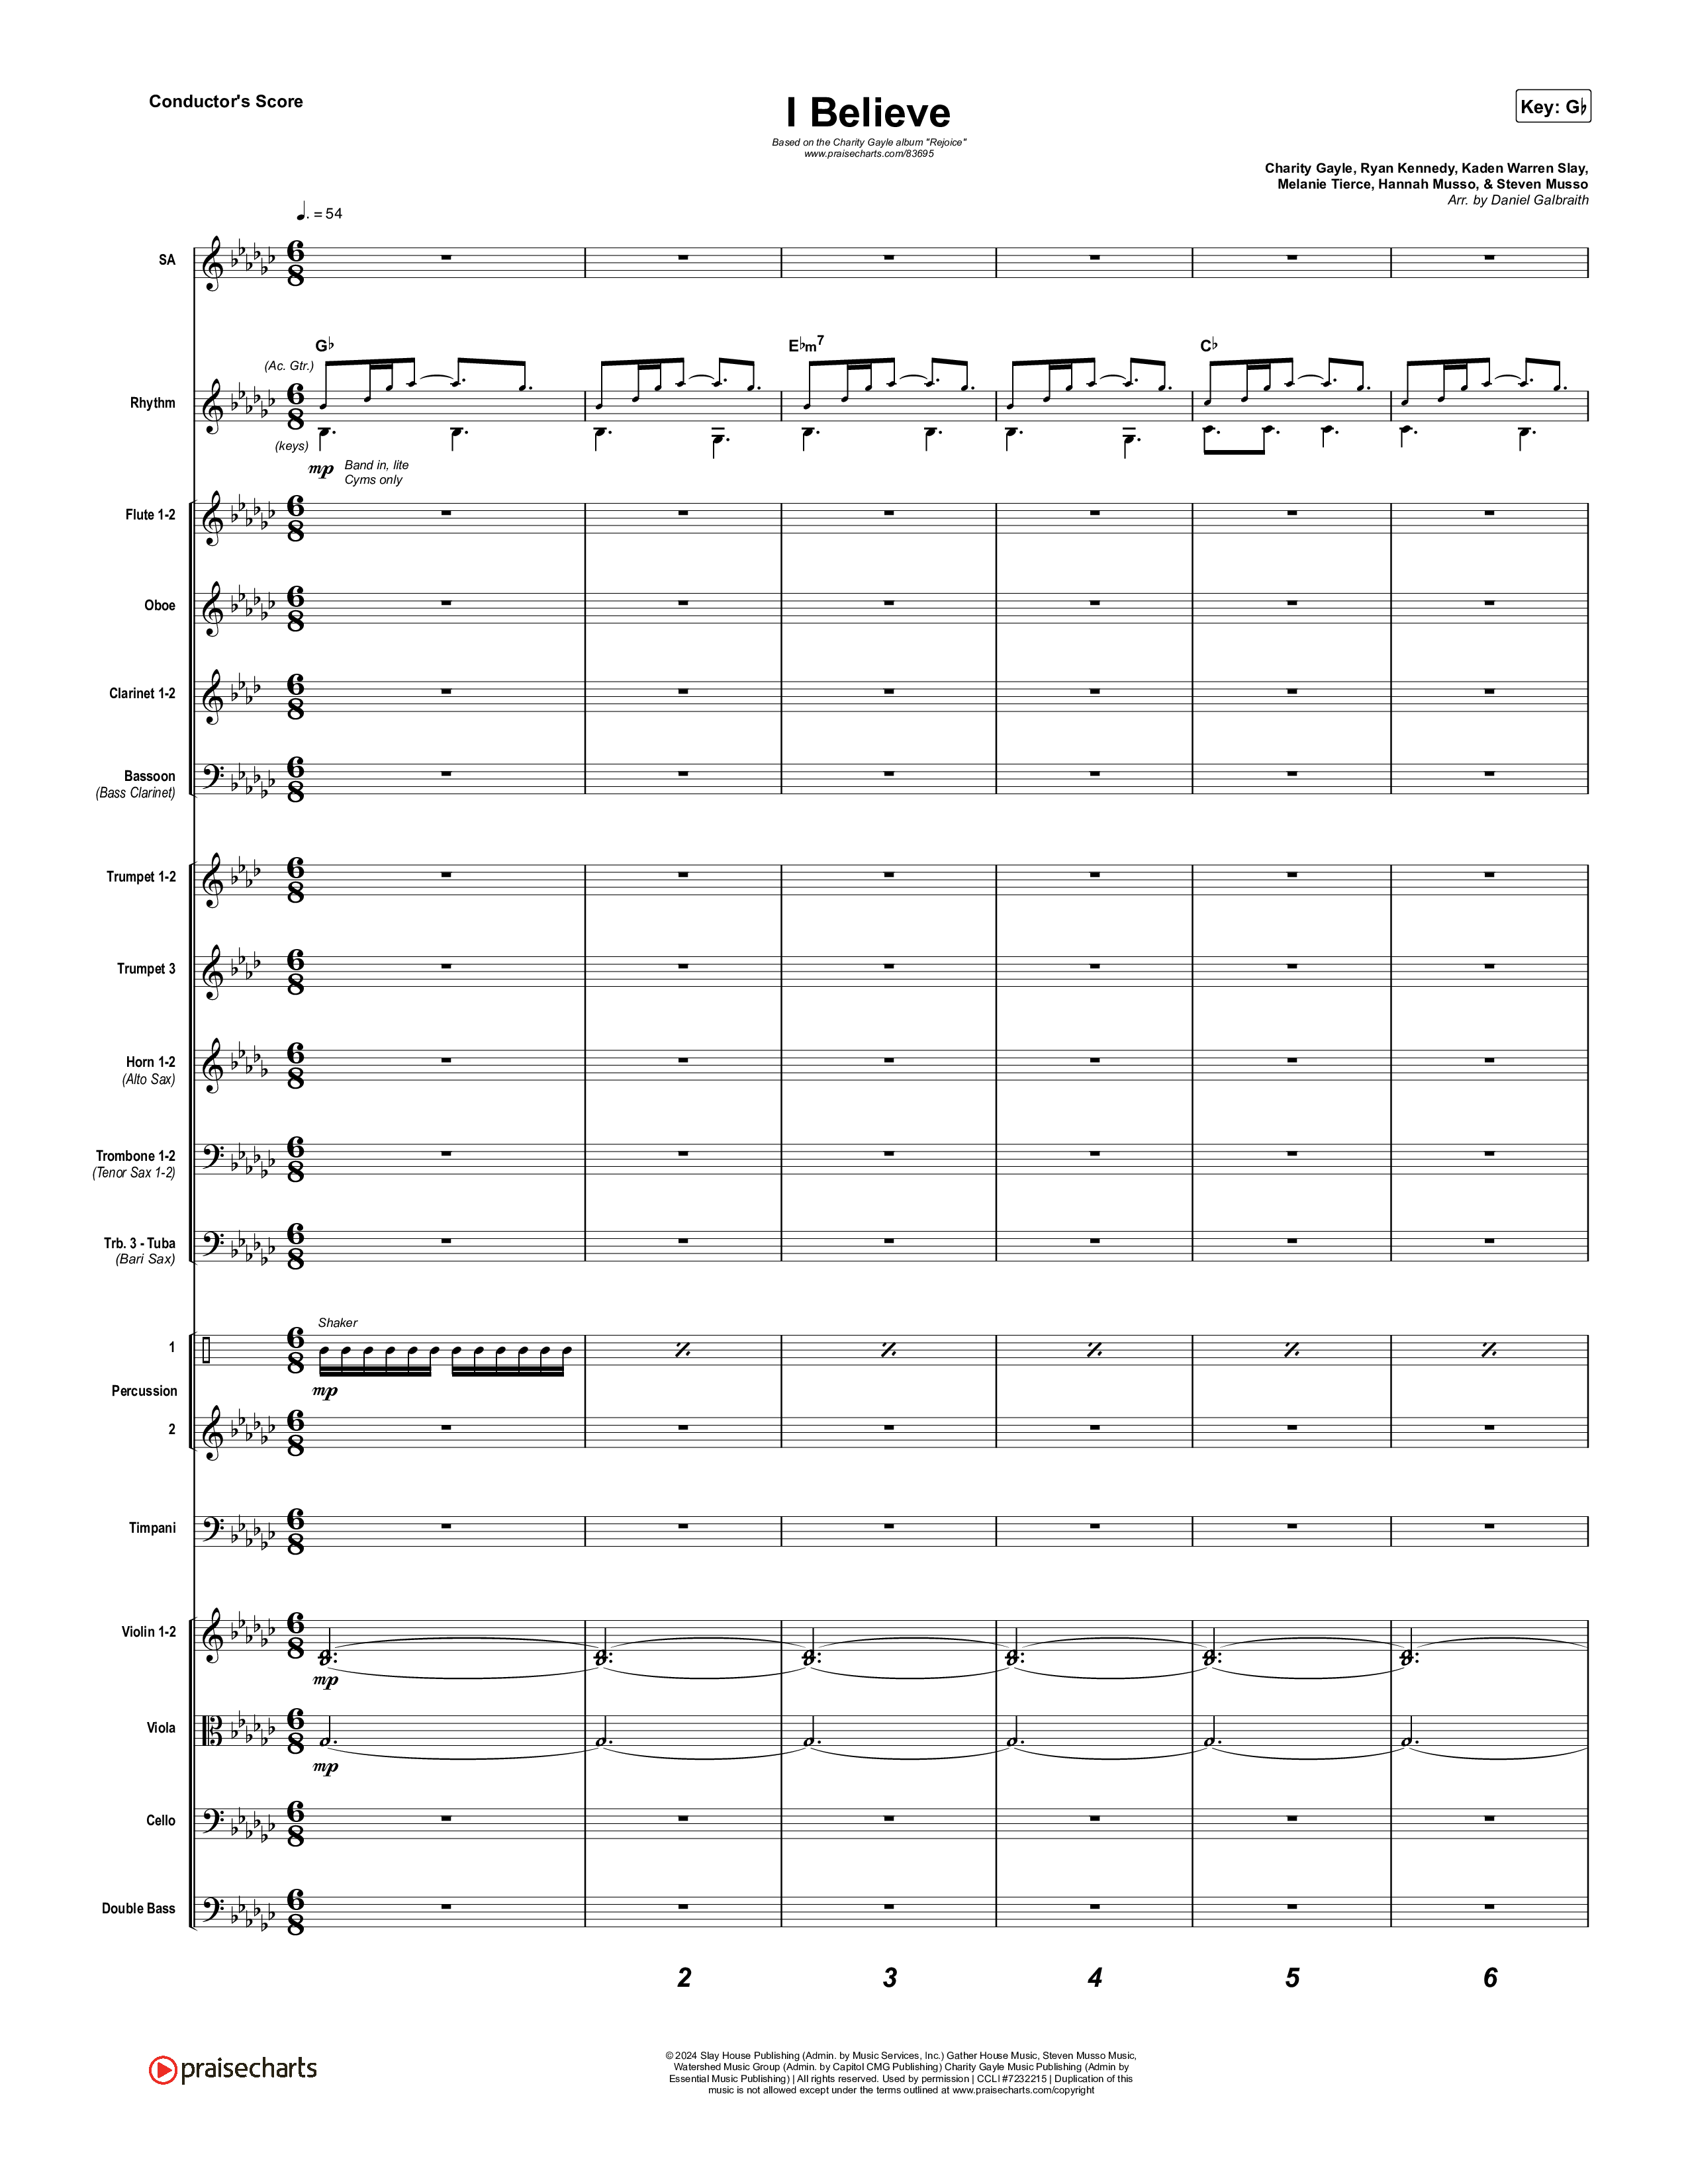 I Believe Conductor's Score (Charity Gayle)